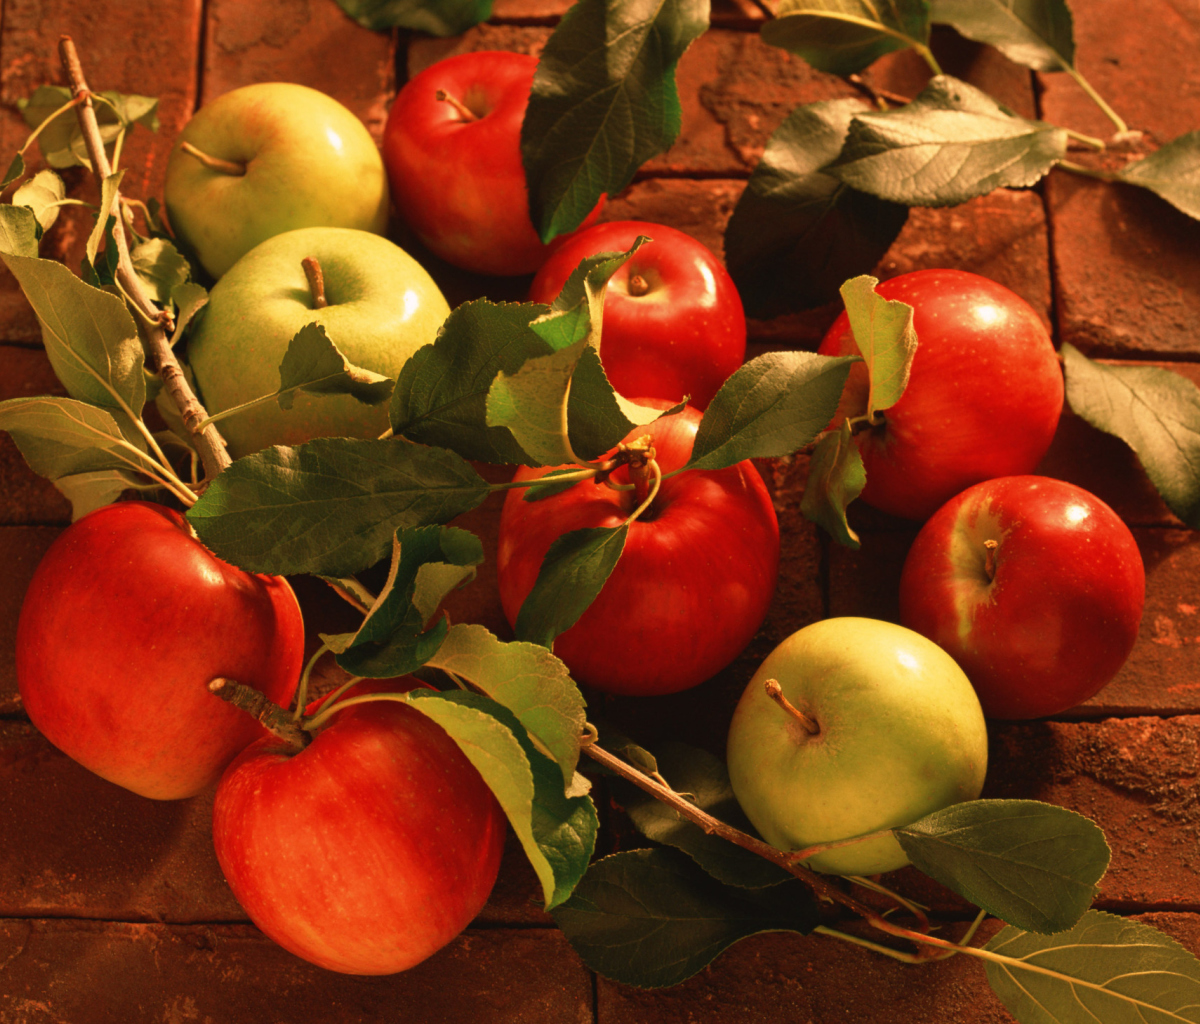 Apples And Juicy Leaves wallpaper 1200x1024